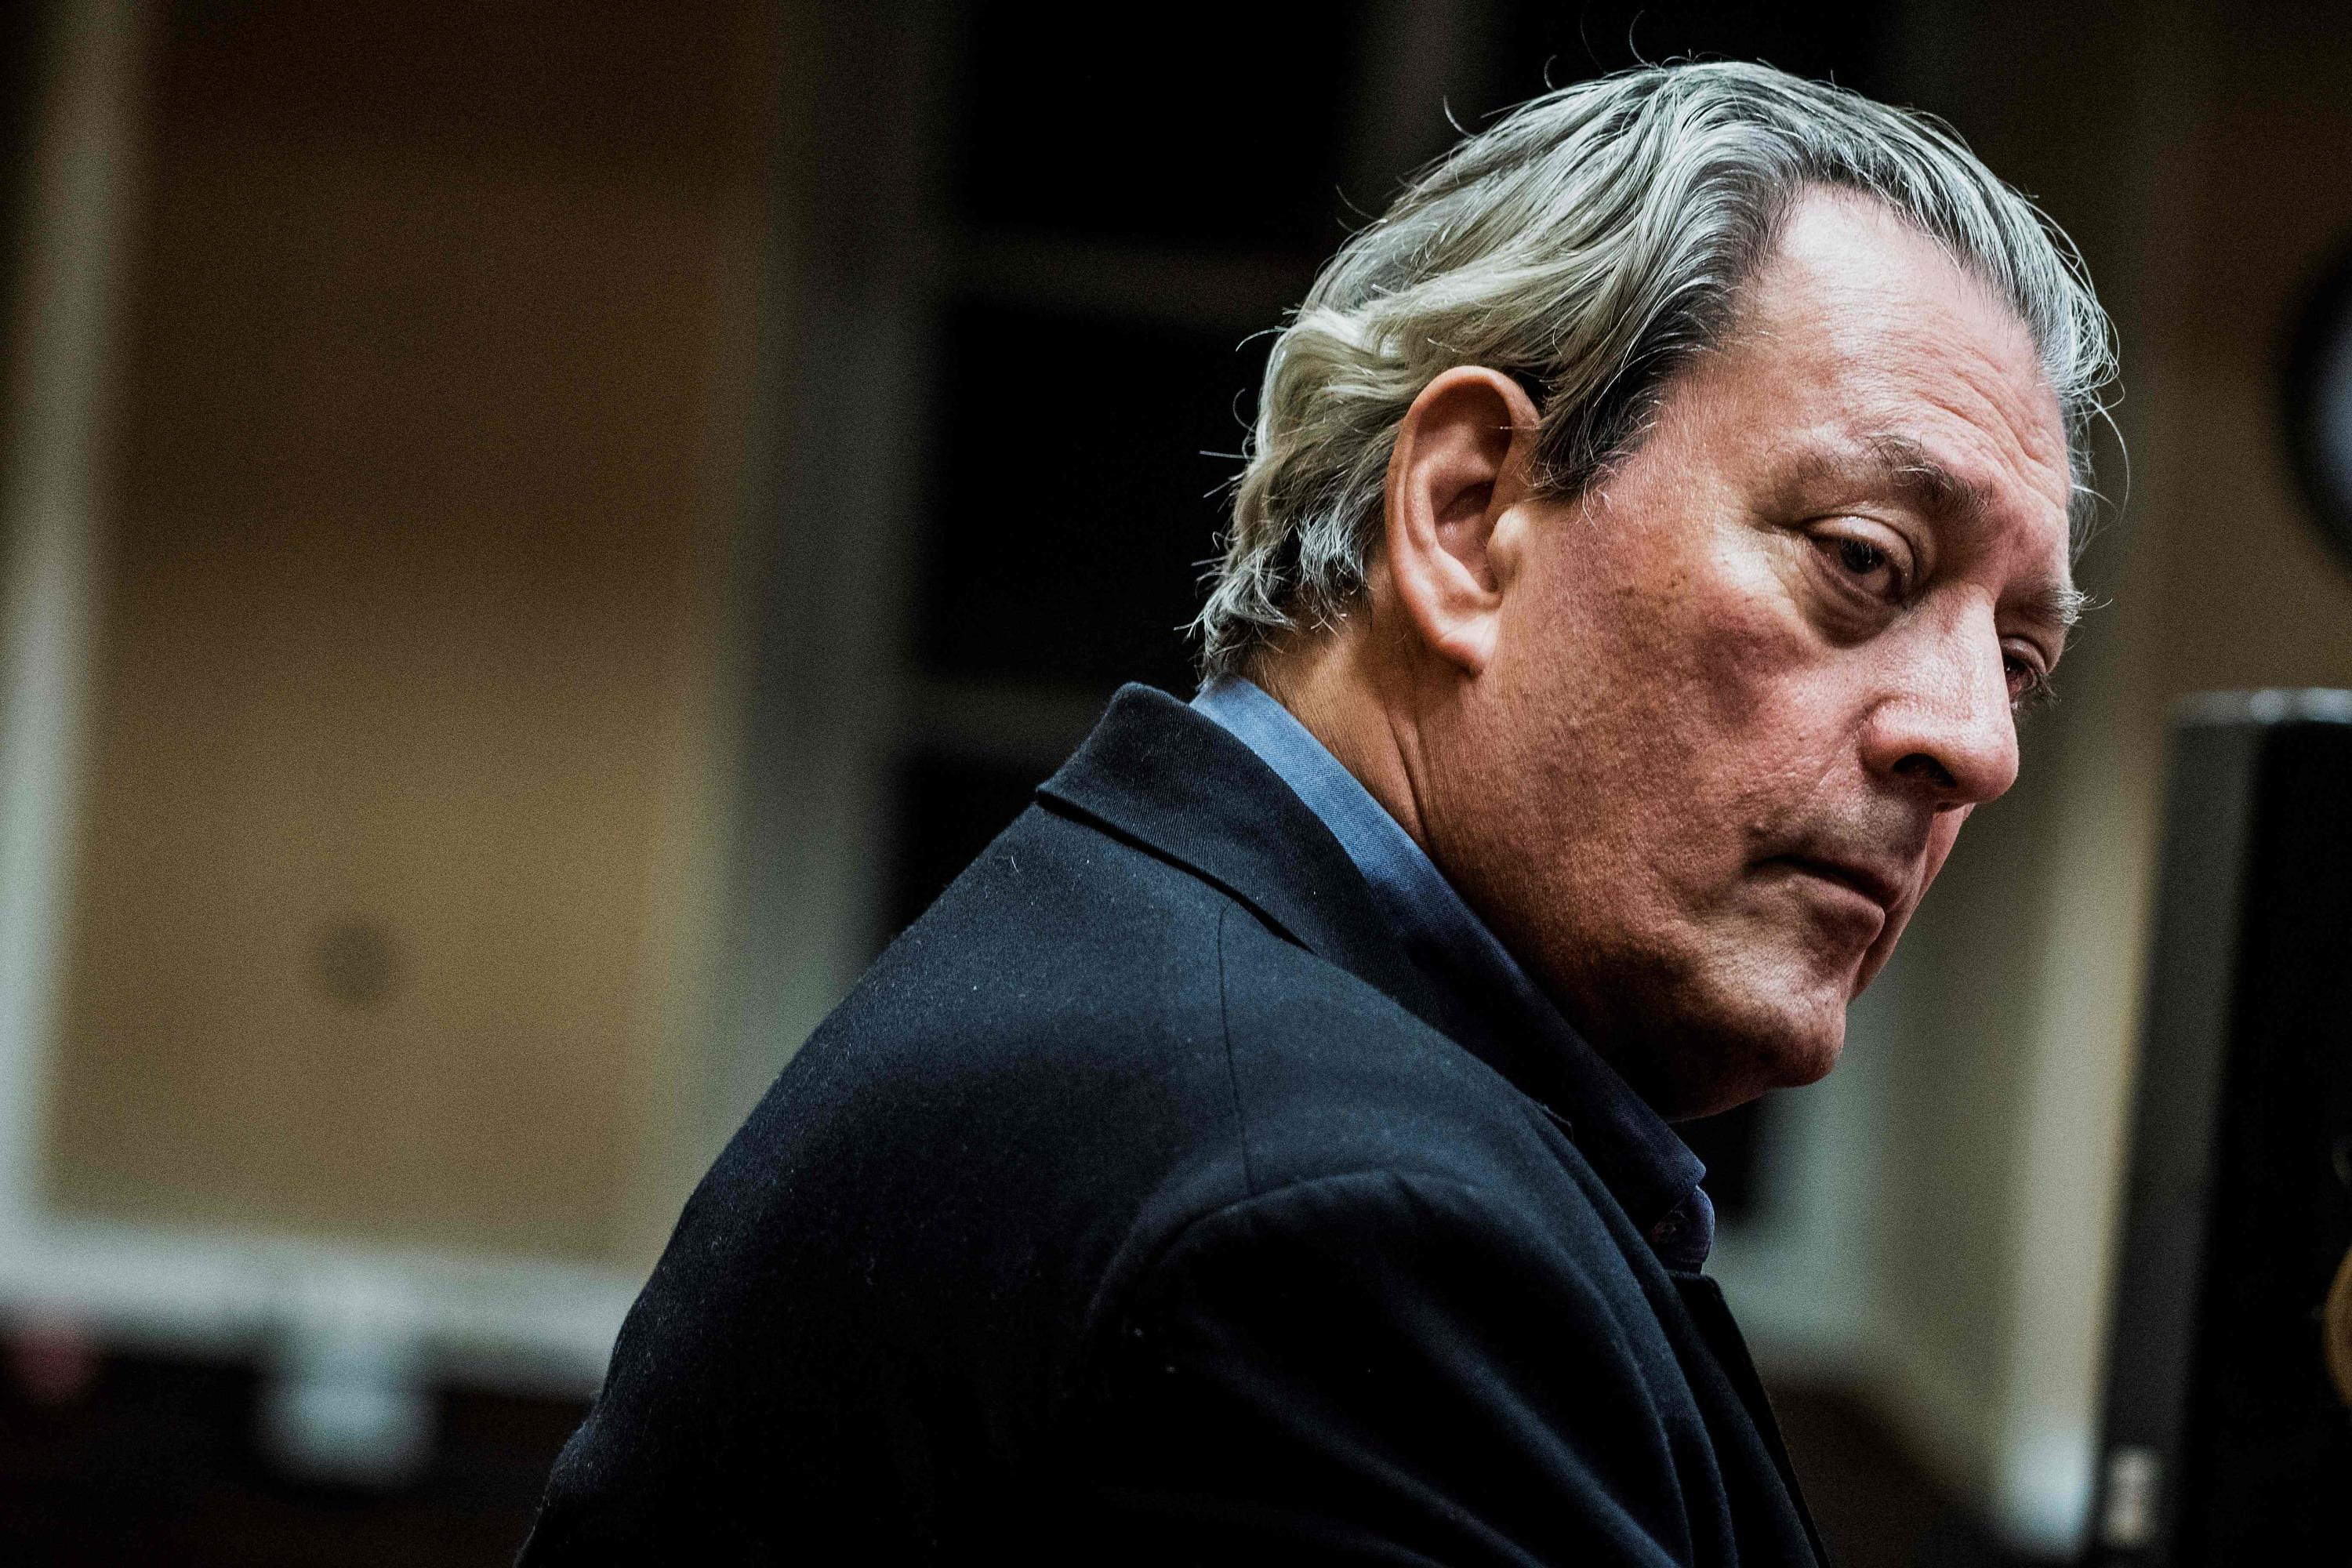 Death of Paul Auster: Actes Sud says he is “lucky” to have been his publisher in France